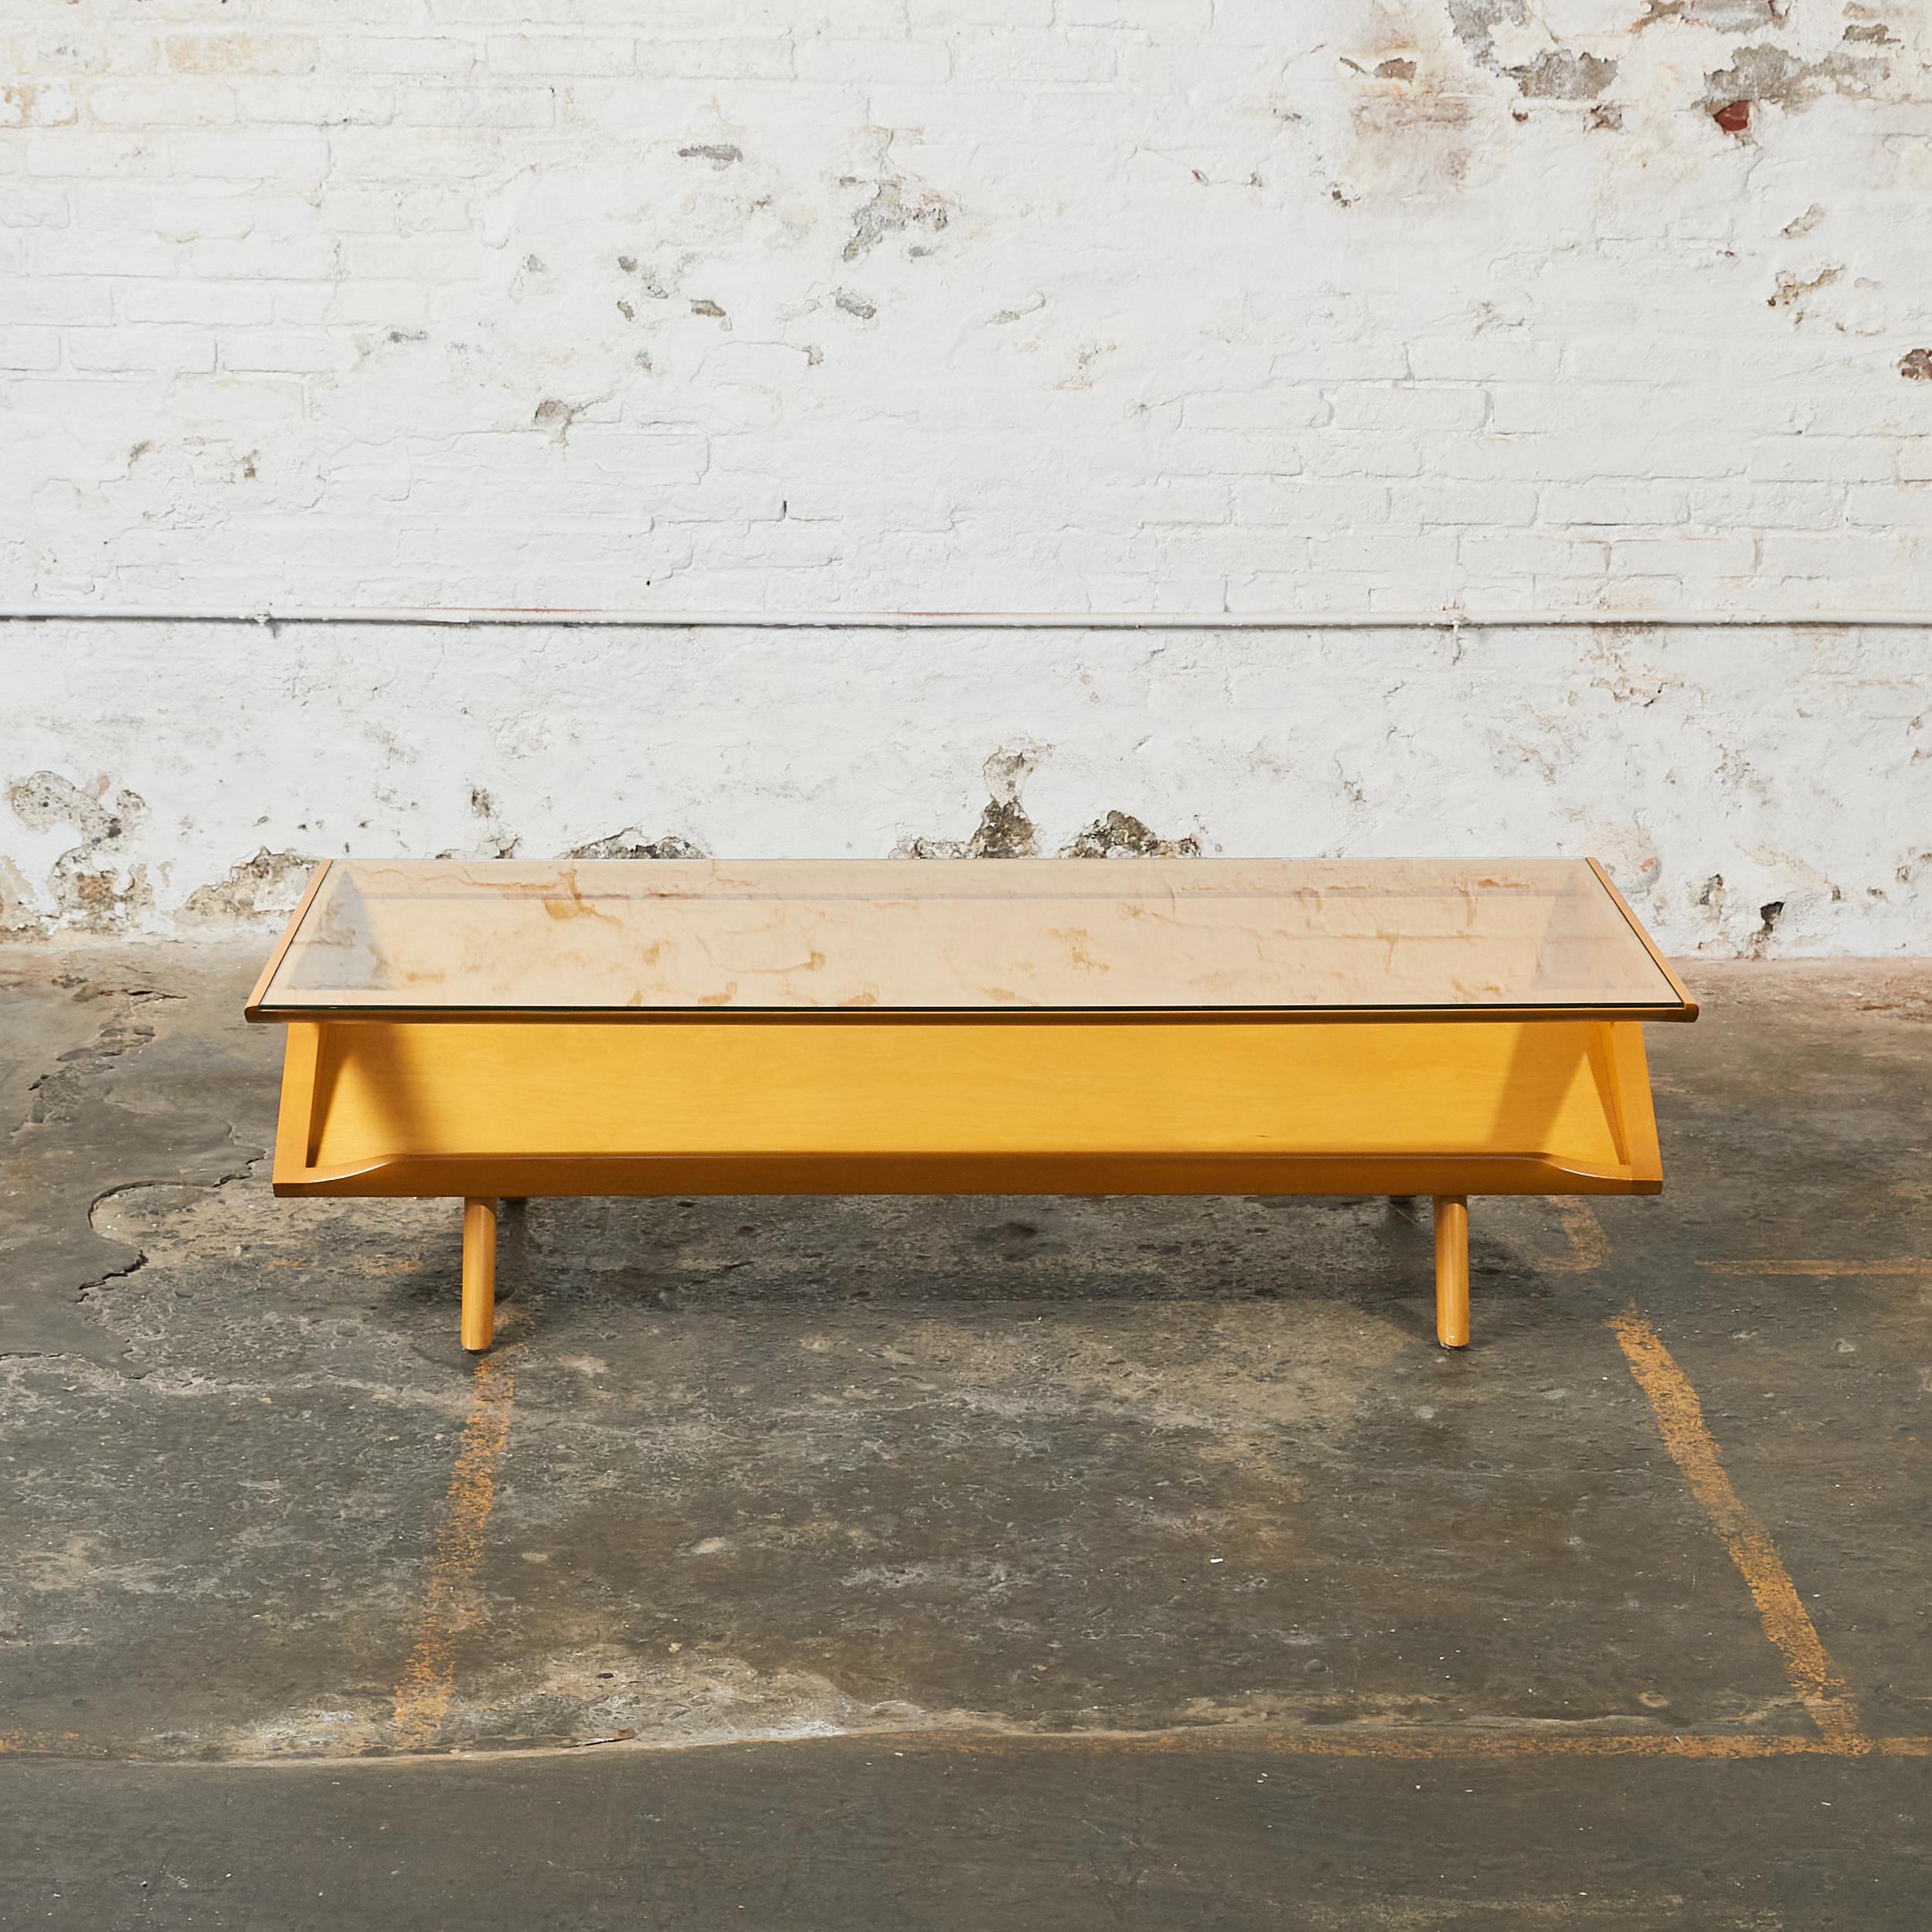 Long rectangular midcentury coffee table. The top frame holds a clear glass insert to see through an angled lower display shelf.
A Classic design by Paul Laszlo for the prominent California design company Brown Saltman.